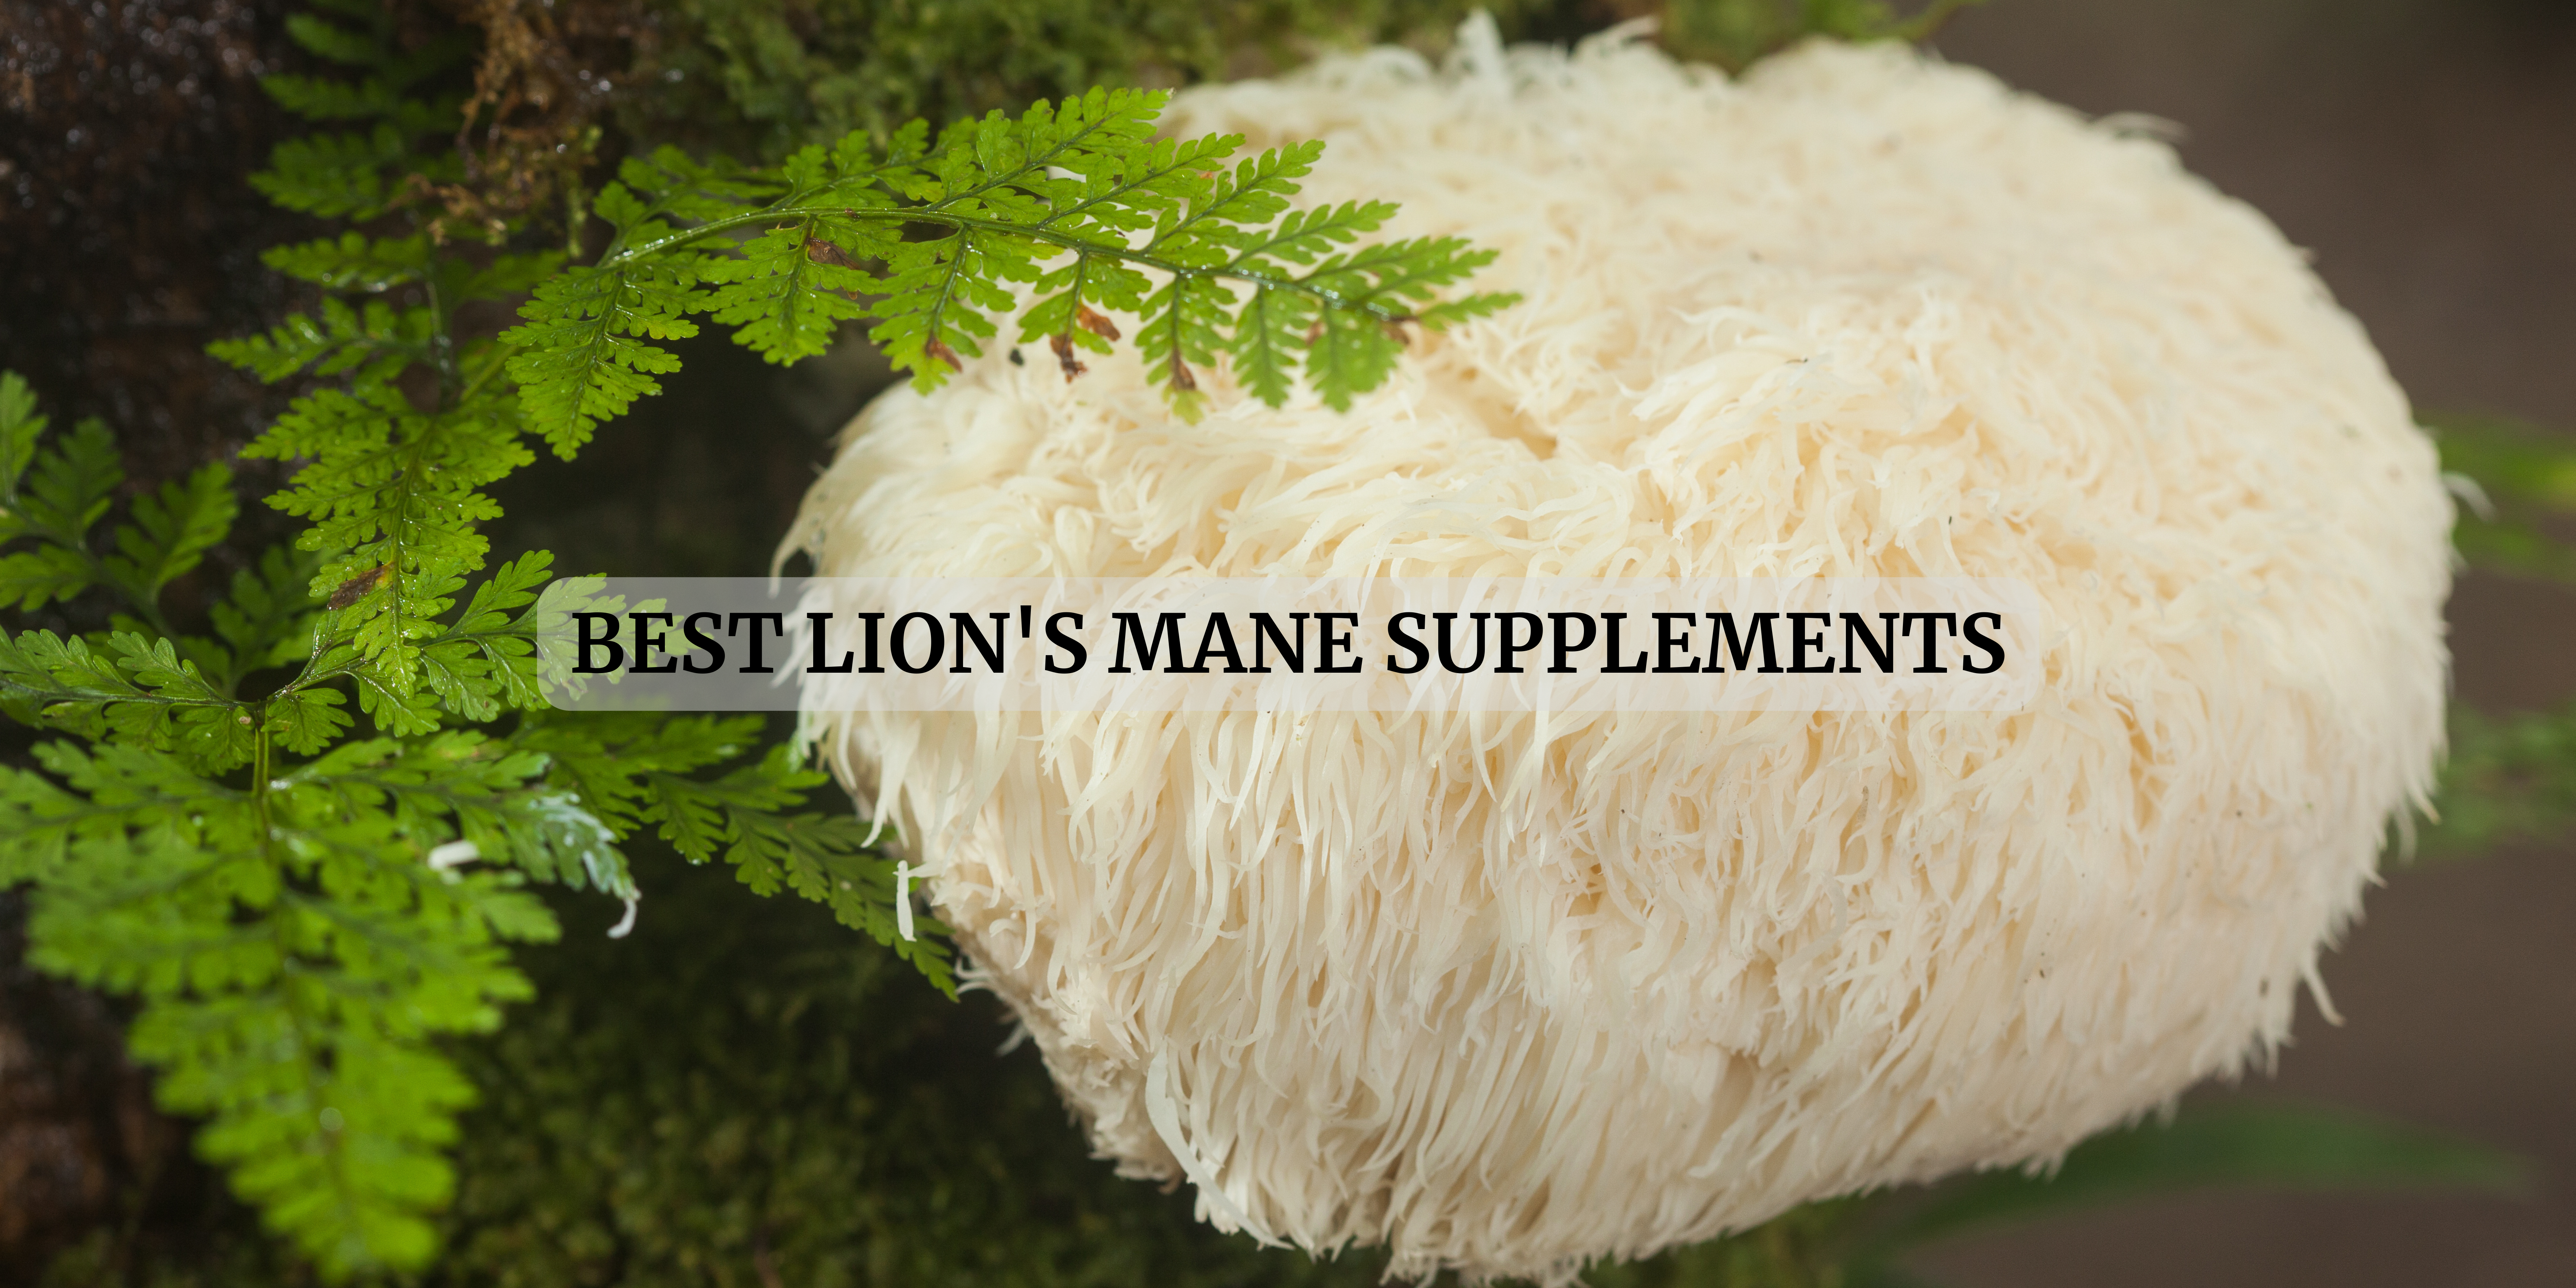 lion's mane supplements in the World